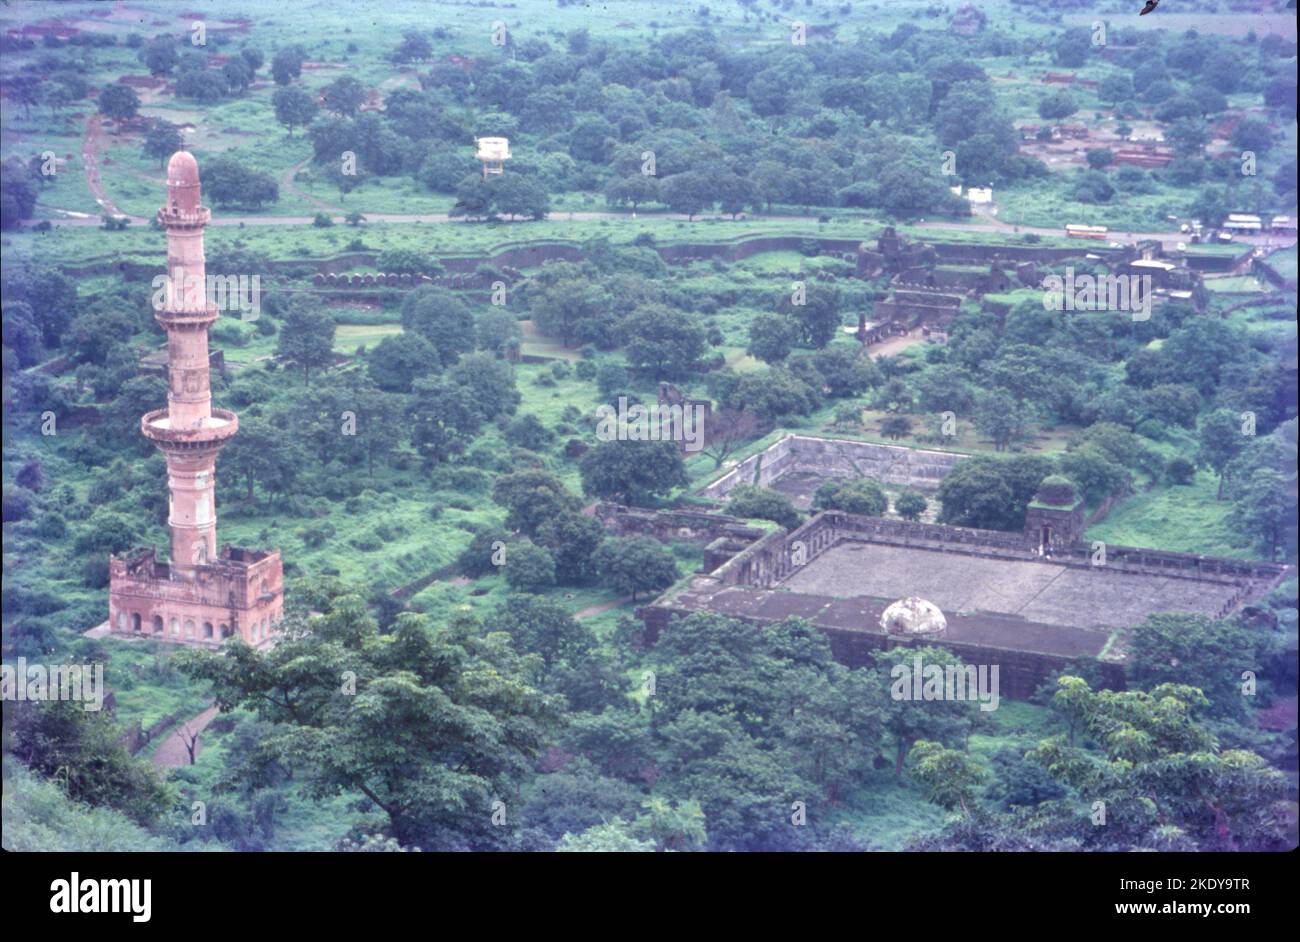 The Chand Minar or the Tower of the Moon is a medieval tower in Daulatabad, India. The tower is located in the state of Maharashtra near the Daulatabad-Deogiri fort complex. It was erected in 1445 C.E by King Ala-ud-din Bahmani to commemorate his capture of the fort. Stock Photo